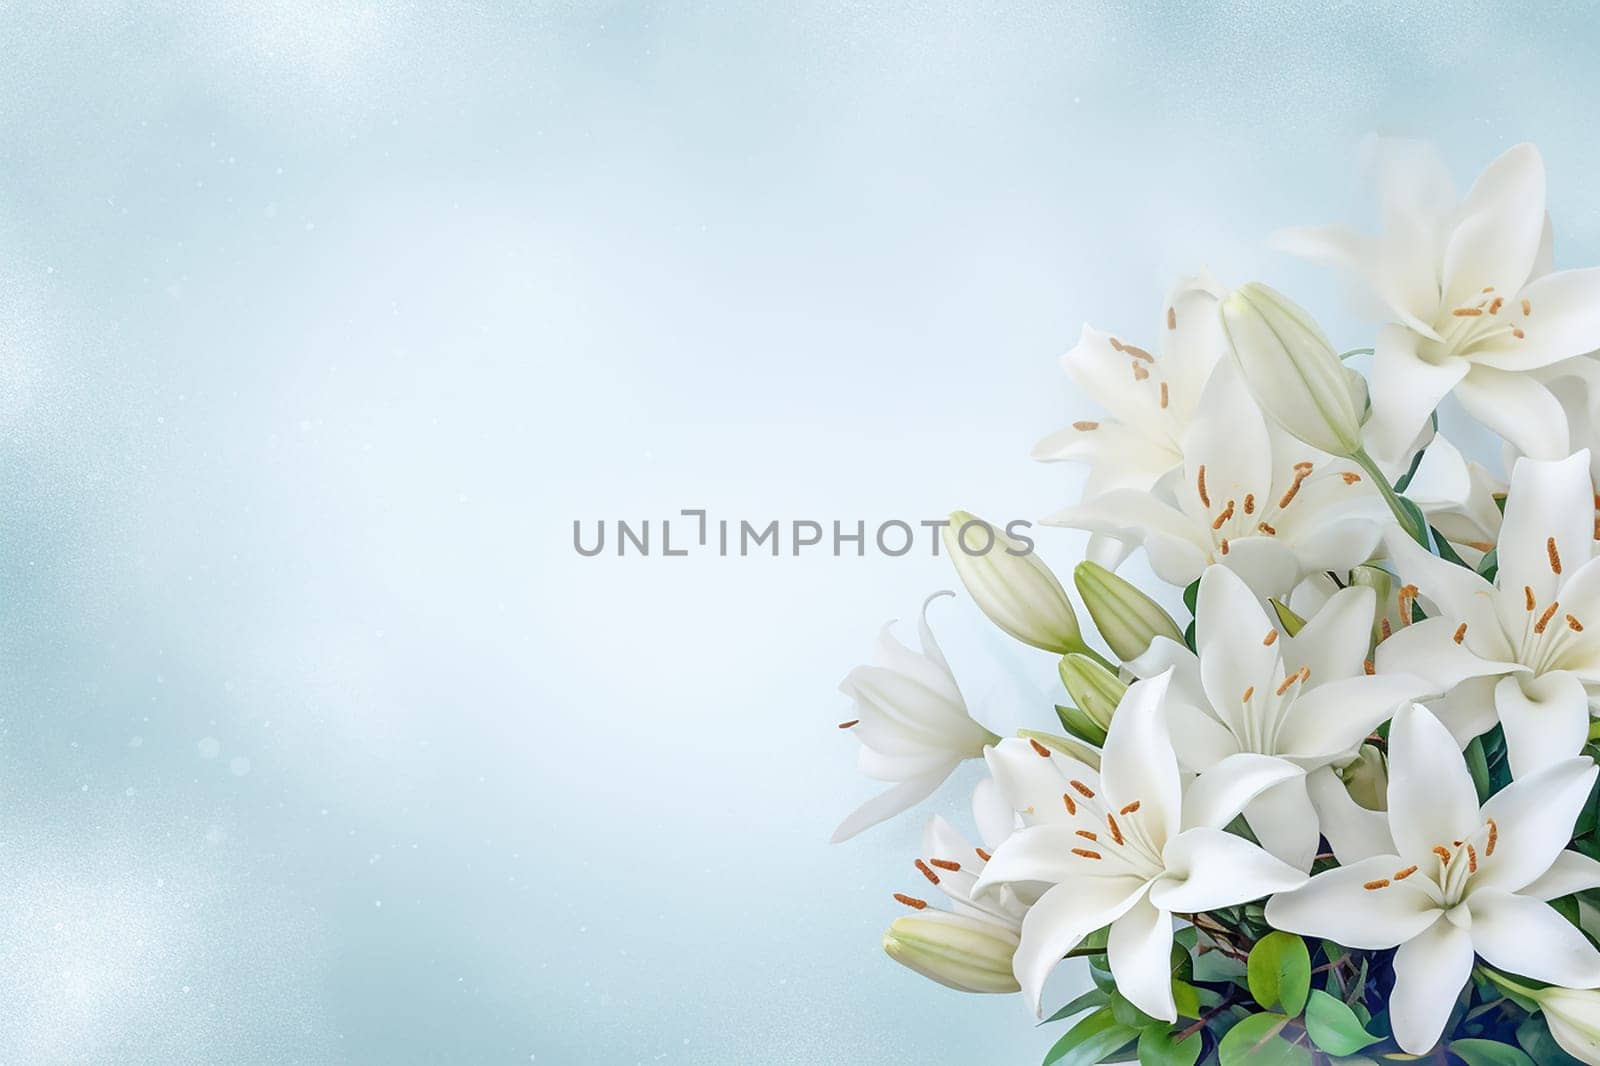 Elegant white lilies with a soft blue background, giving a serene vibe.